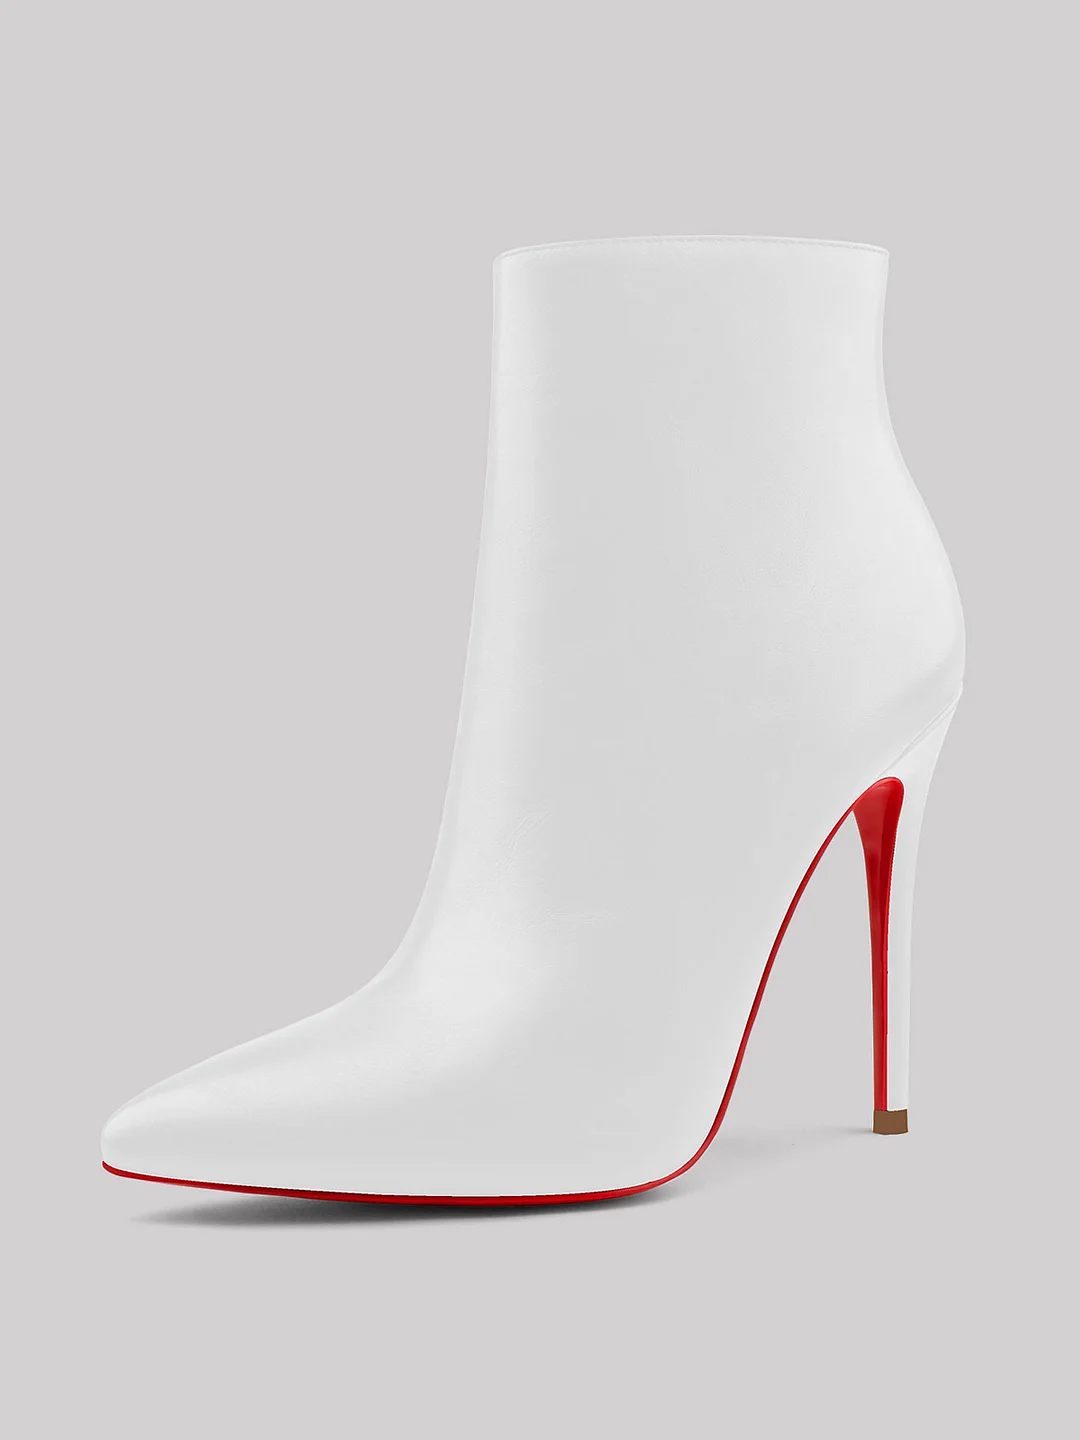 4.72" Women's Ankle Boots Closed Pointed Toe Stilettos Booties Red Bottom Heels Matte Shoes